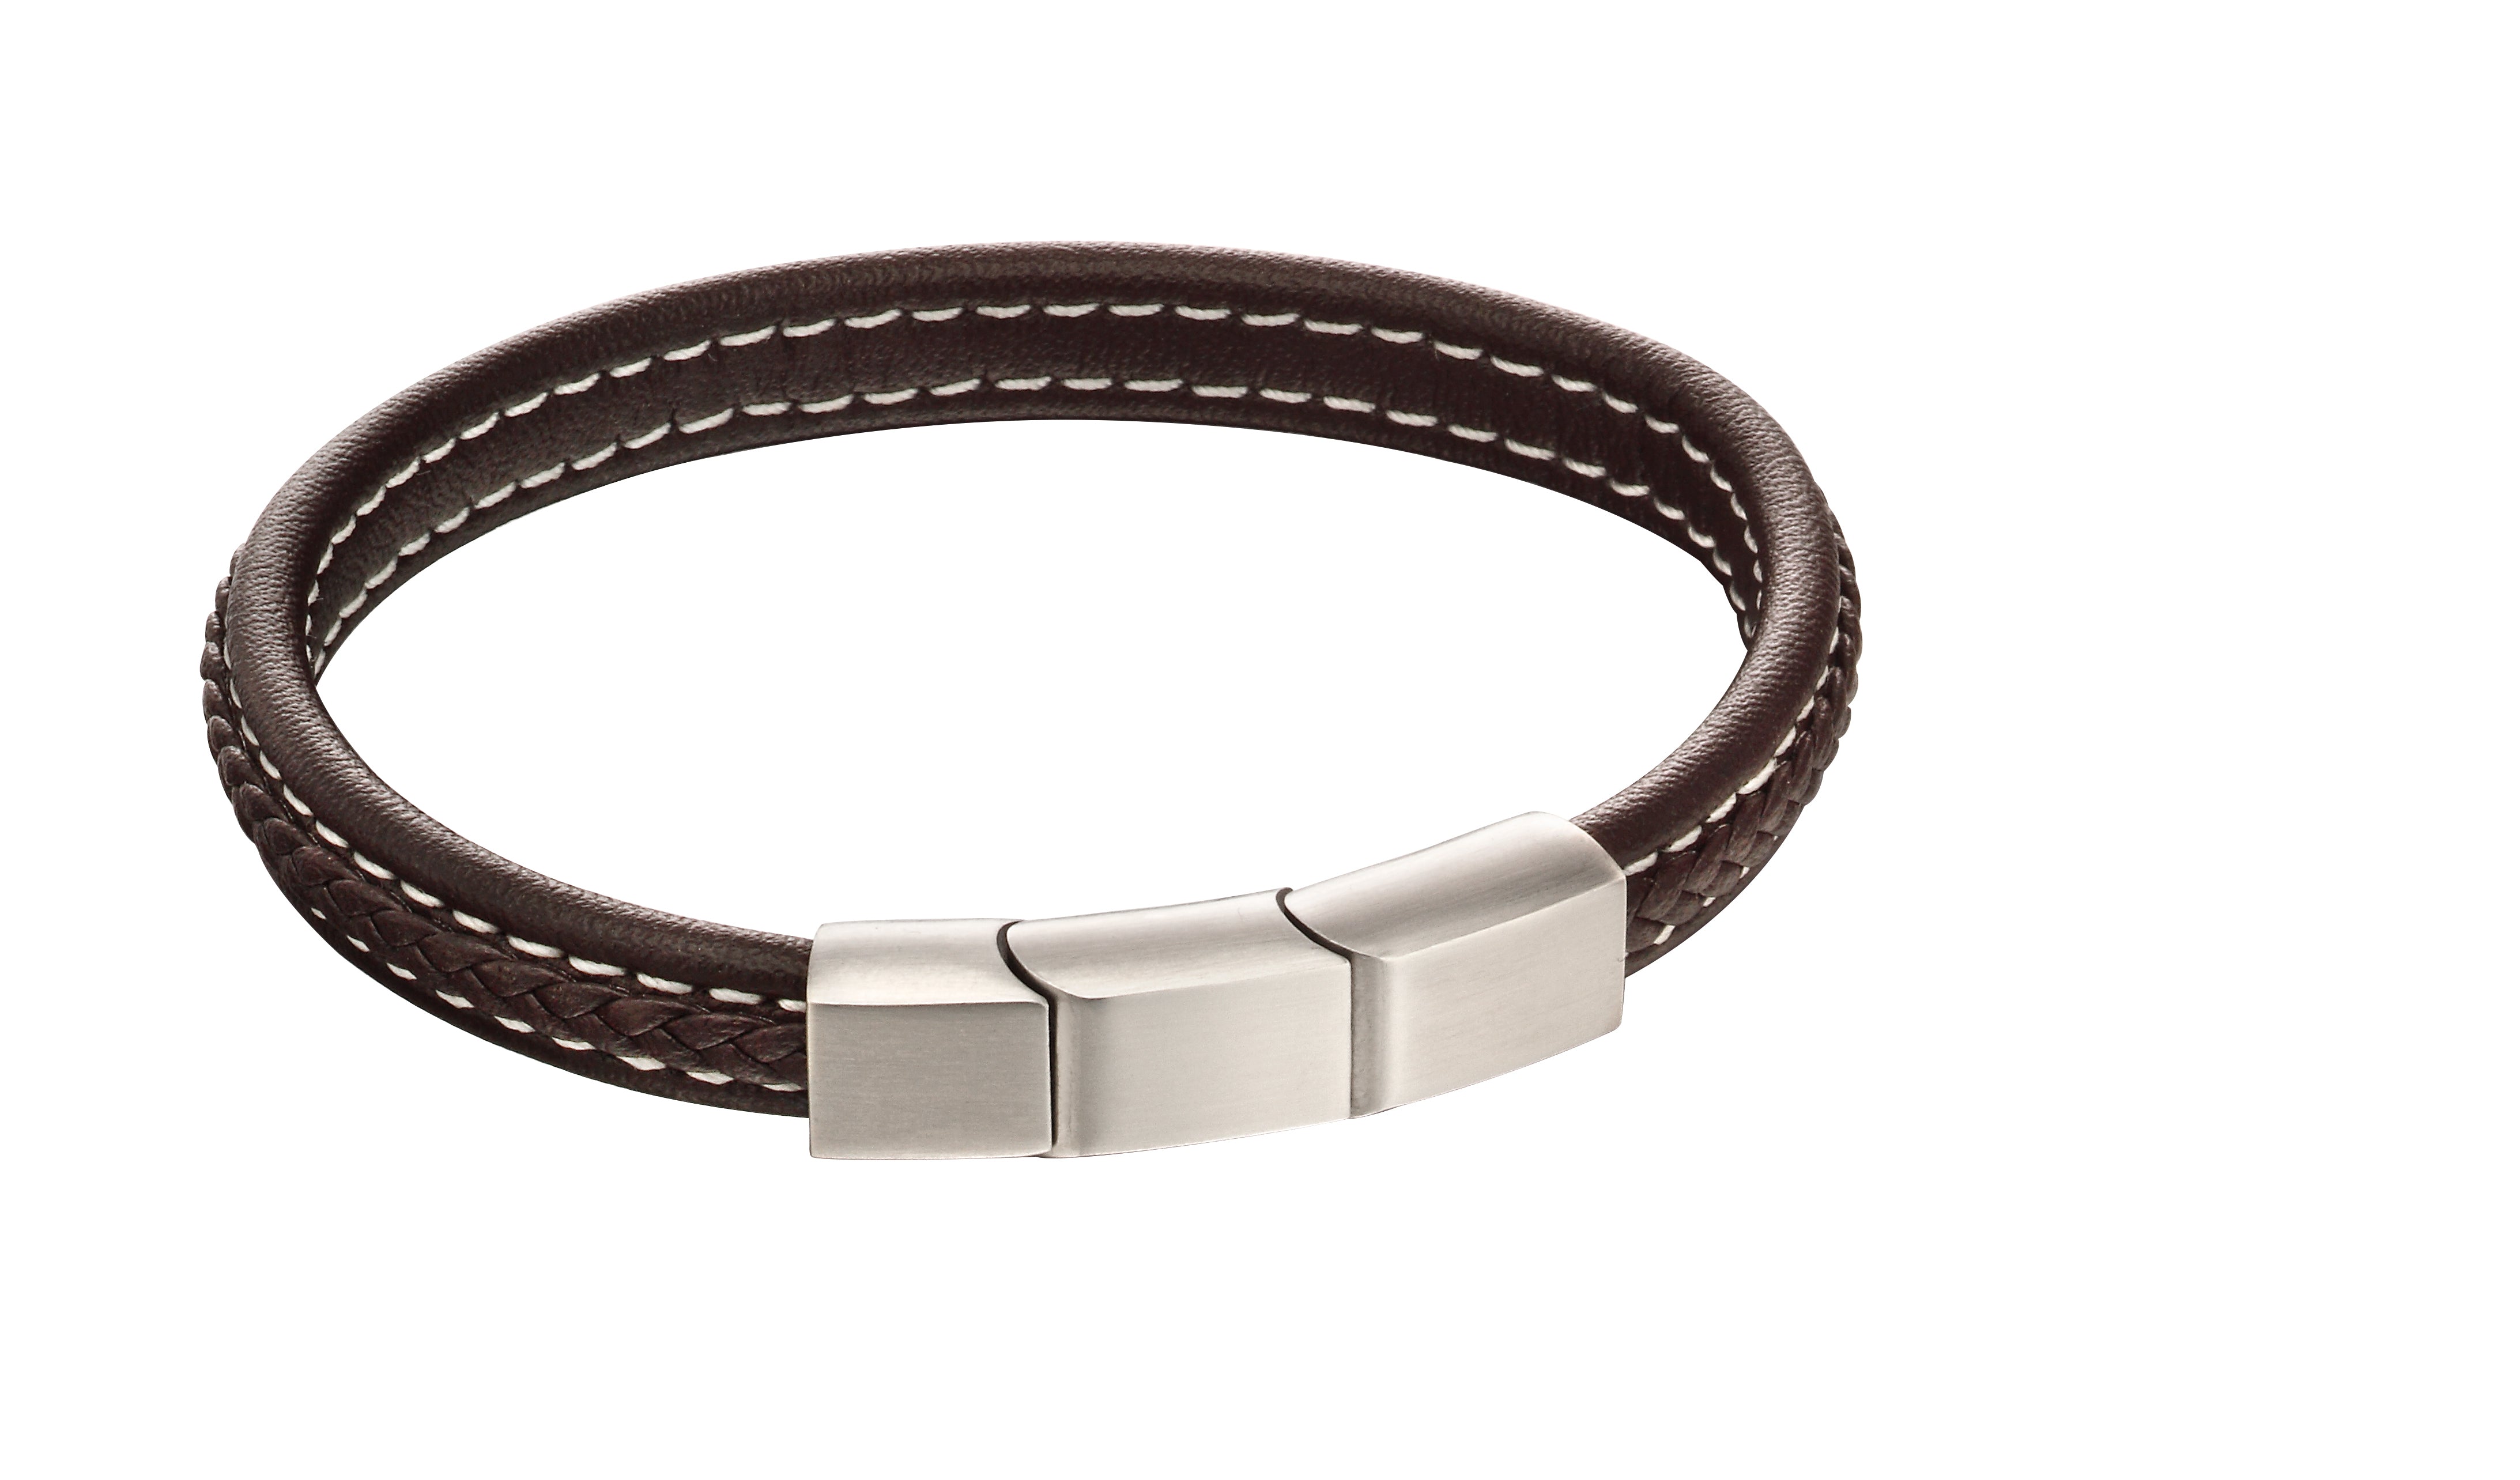 Stainless Steel & Brown Plaited Leather Bracelet - FB0016 - Hallmark Jewellers Formby & The Jewellers Bench Widnes